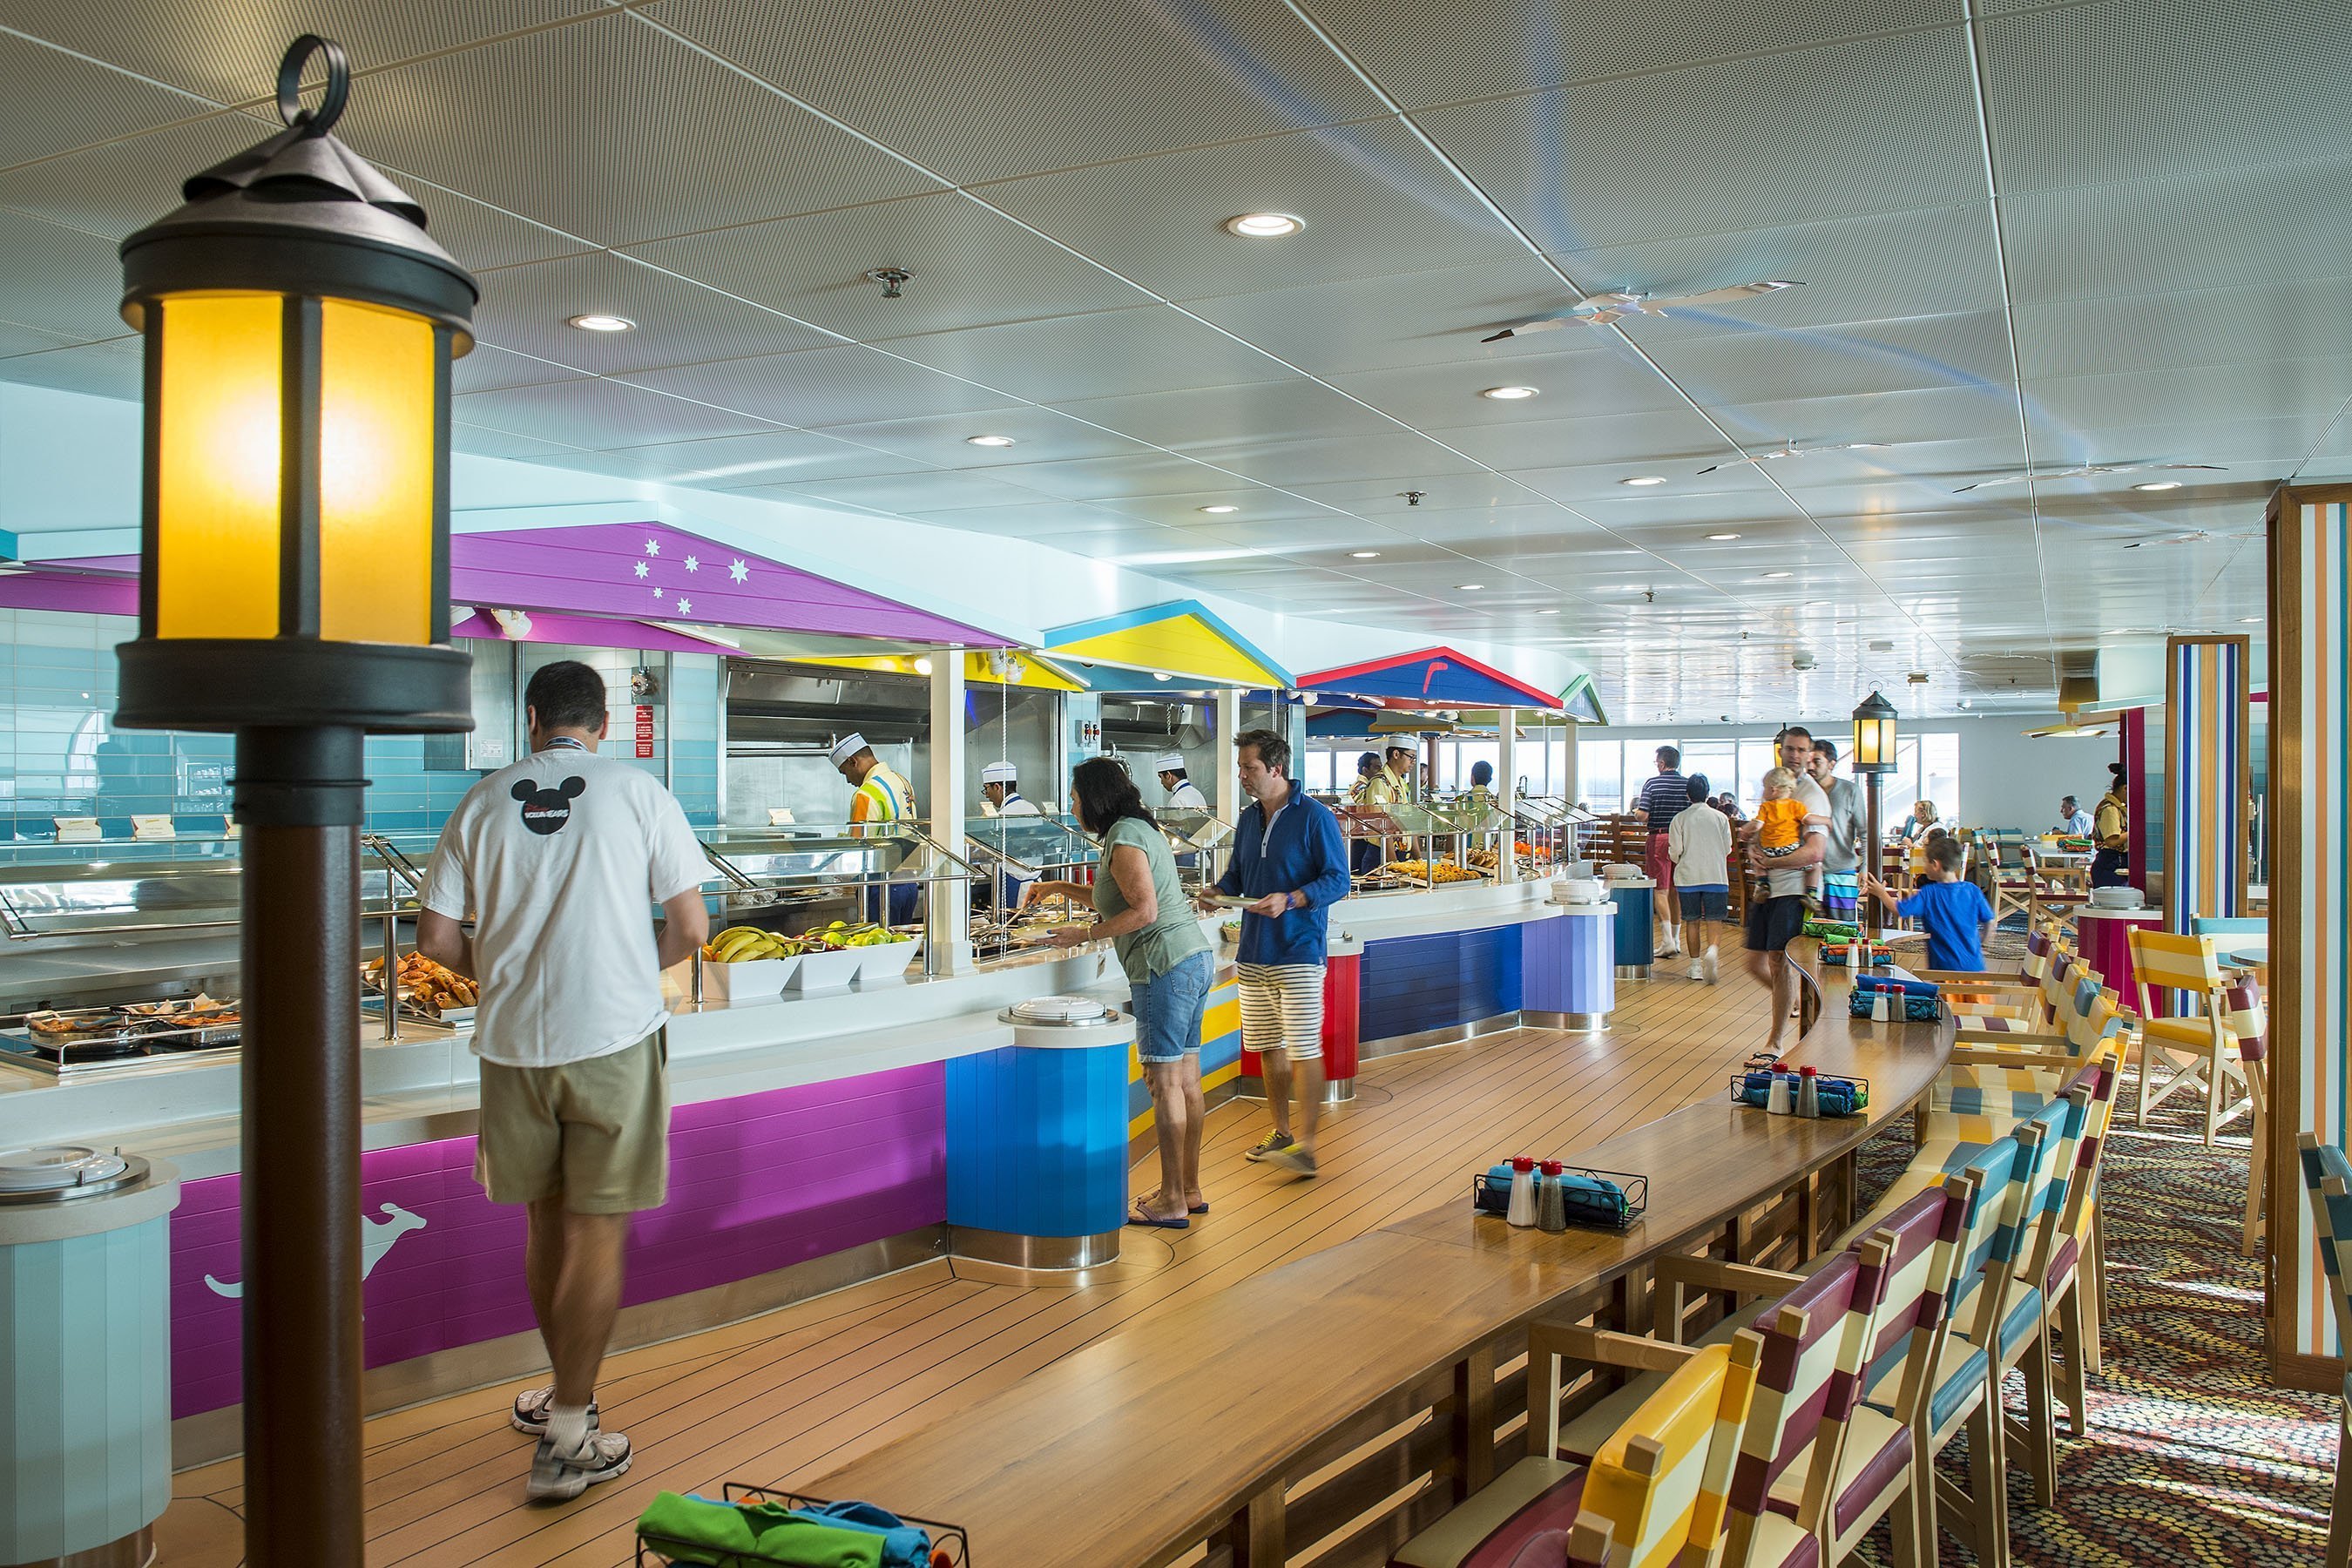 Cabanas buffet onboard Disney Cruise Line offers many choices after you board the ship